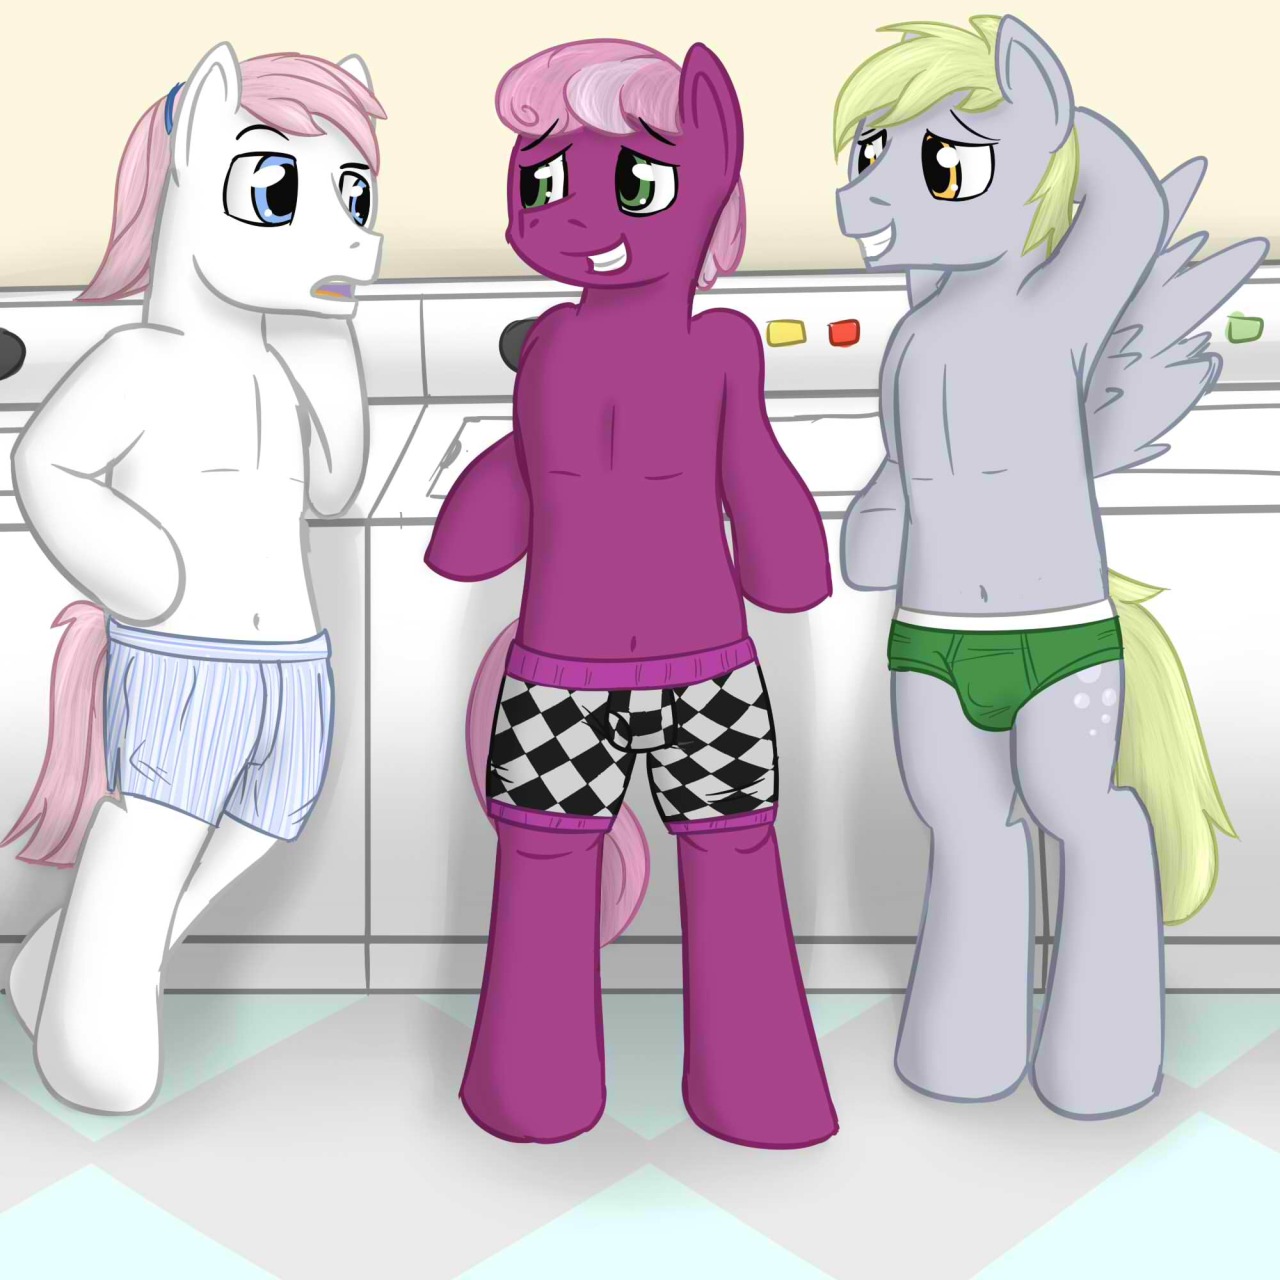 So..laundry day for you guys as well?  Three guys at the laundromat in their underwear,